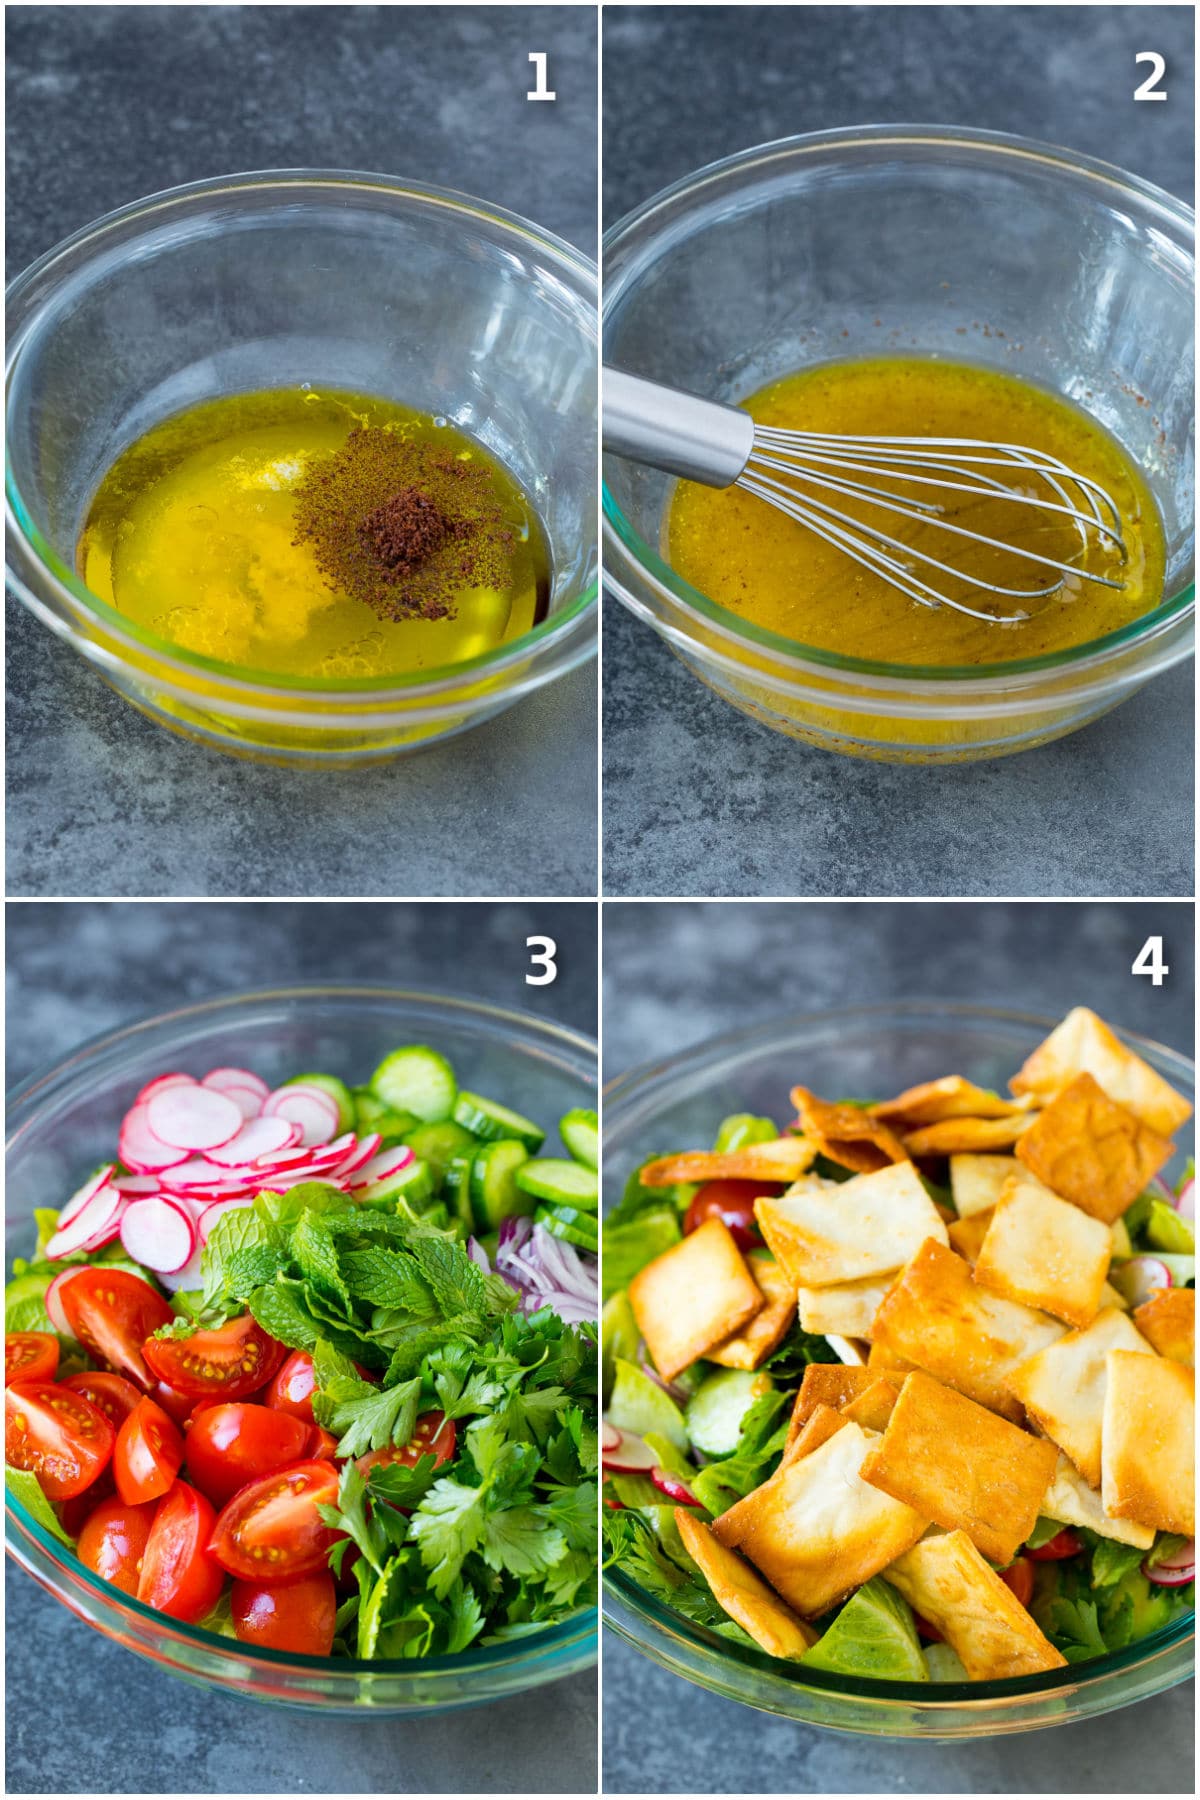 Step by step photos showing how to make dressing and assemble salad.